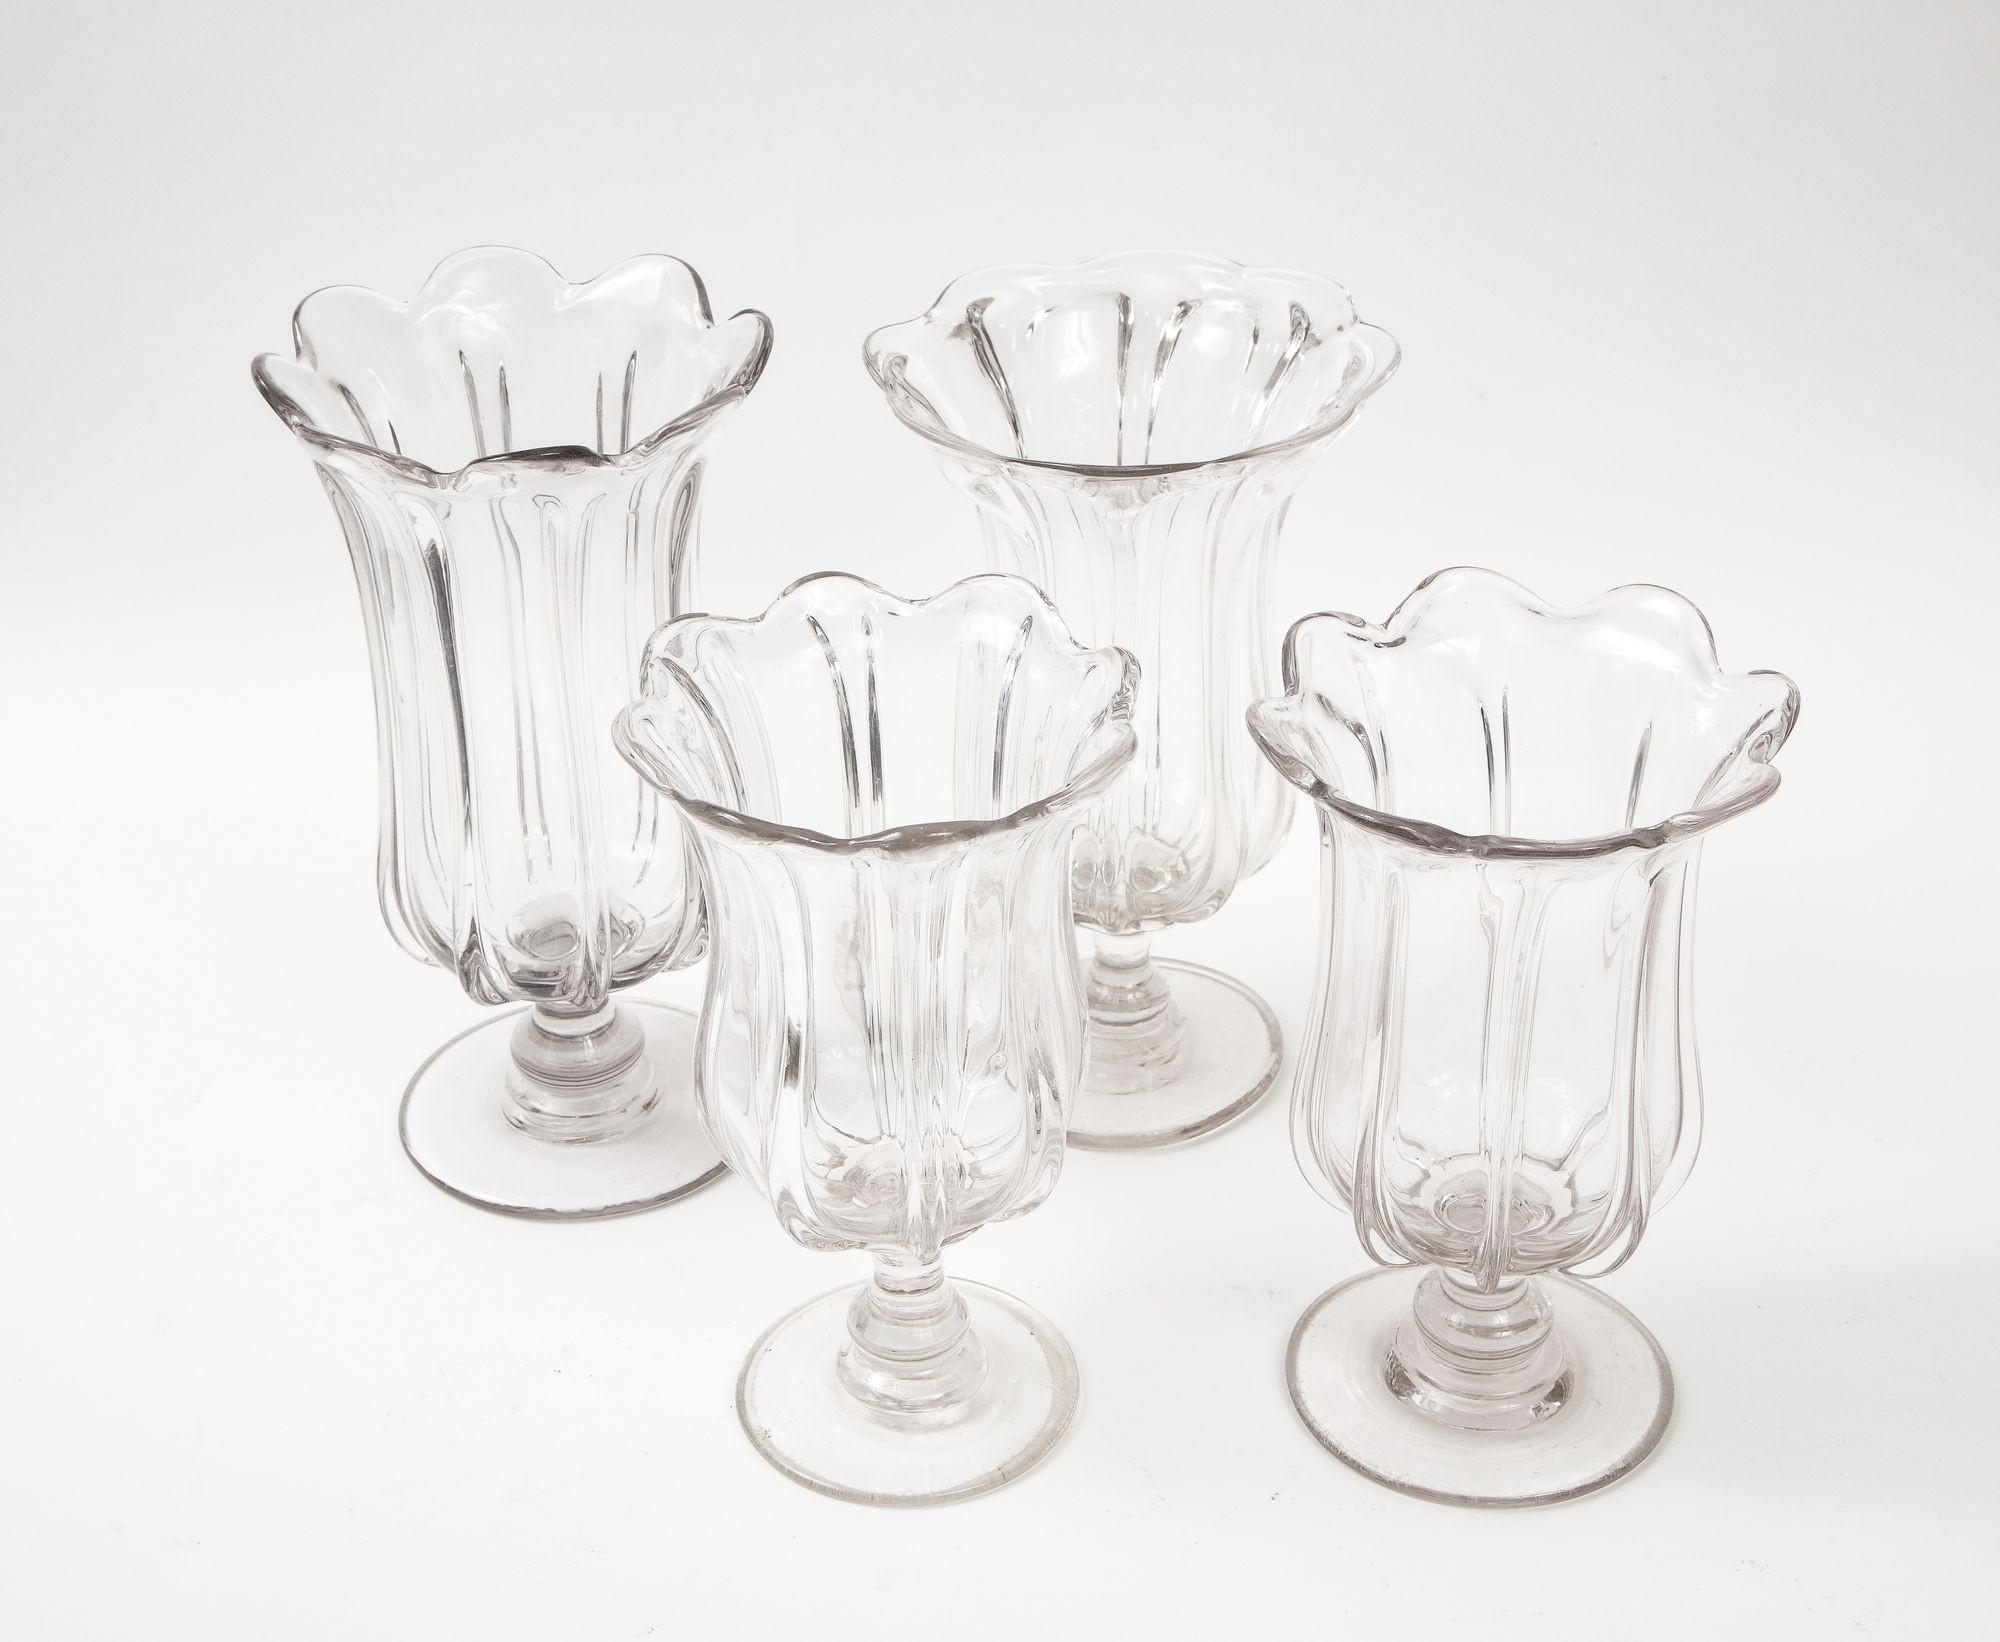 A collection of four heavy clear leaded glass footed vases of shaped and ribbed form with flared scalloped rims, known as celery vases. Elegant table or shelf decoration with or without flowers/celery. England, 19th century.